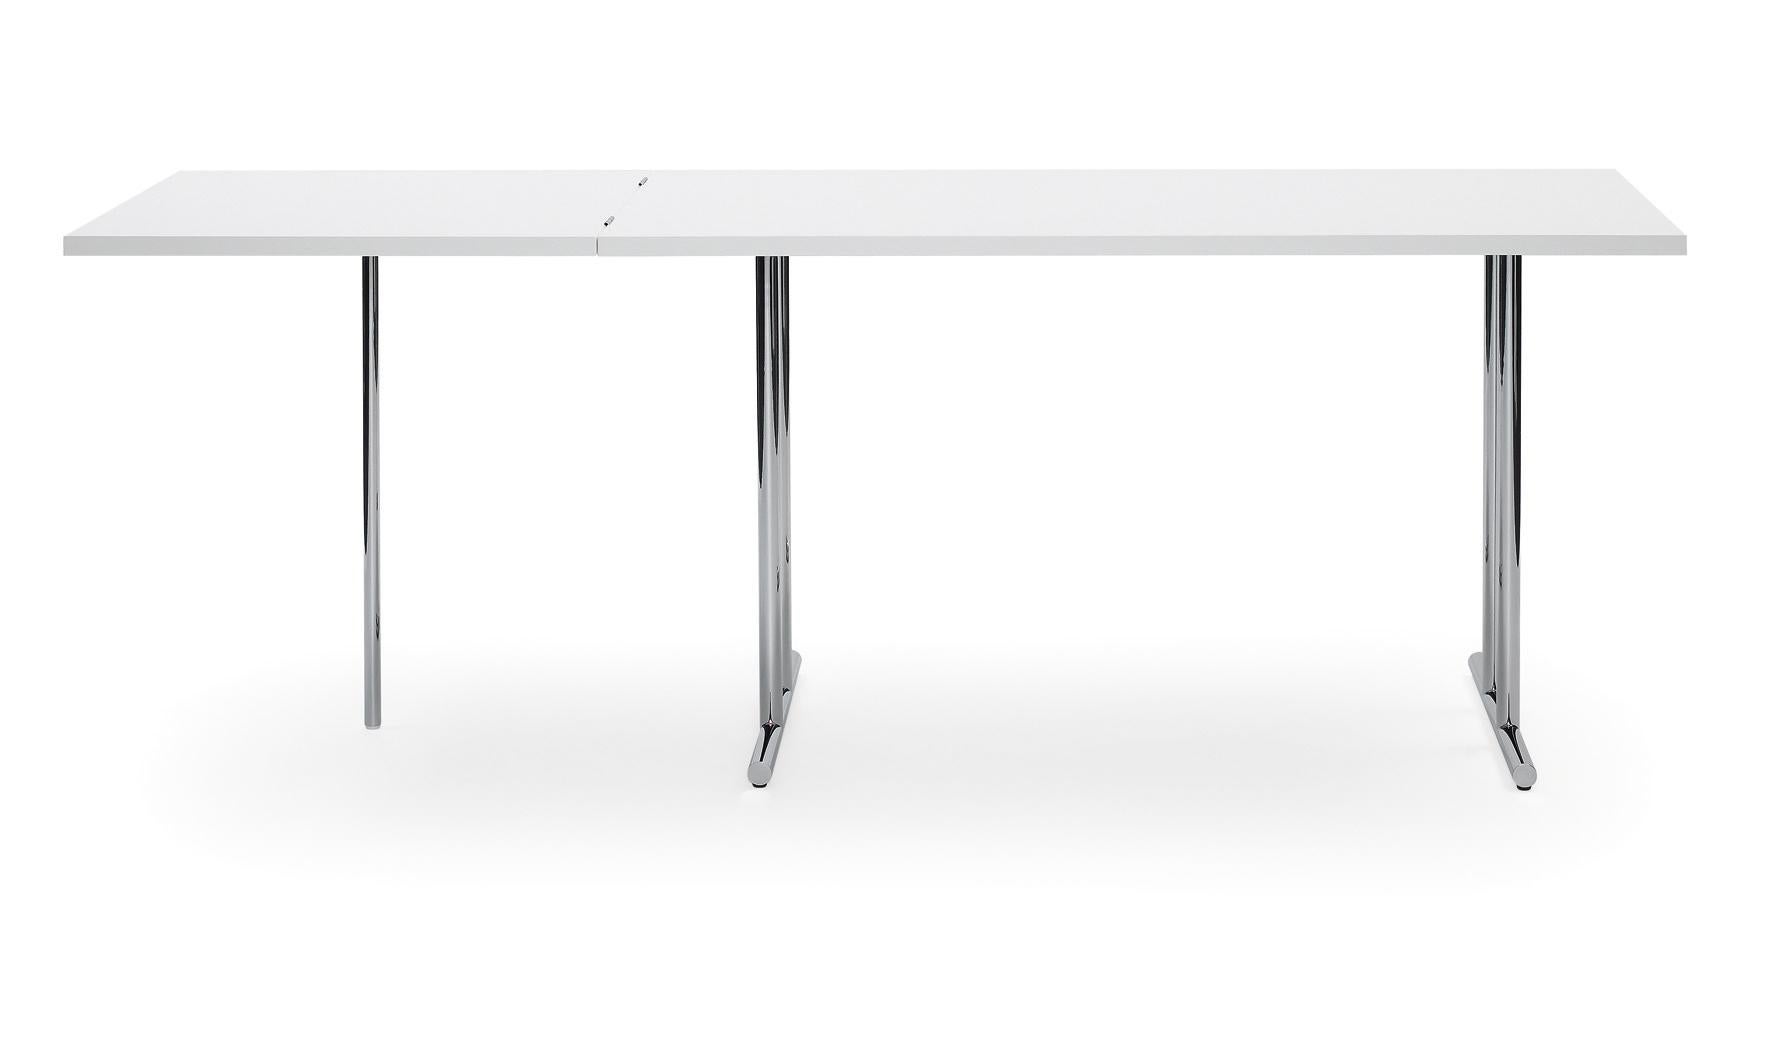 Like the majority of Eileen Gray‘s tables, this one too can transform itself. And as always she found an unexpected solution. The folding section of the tabletop is supported by a single leg out of chromium plated steel tubing – a conscious break in